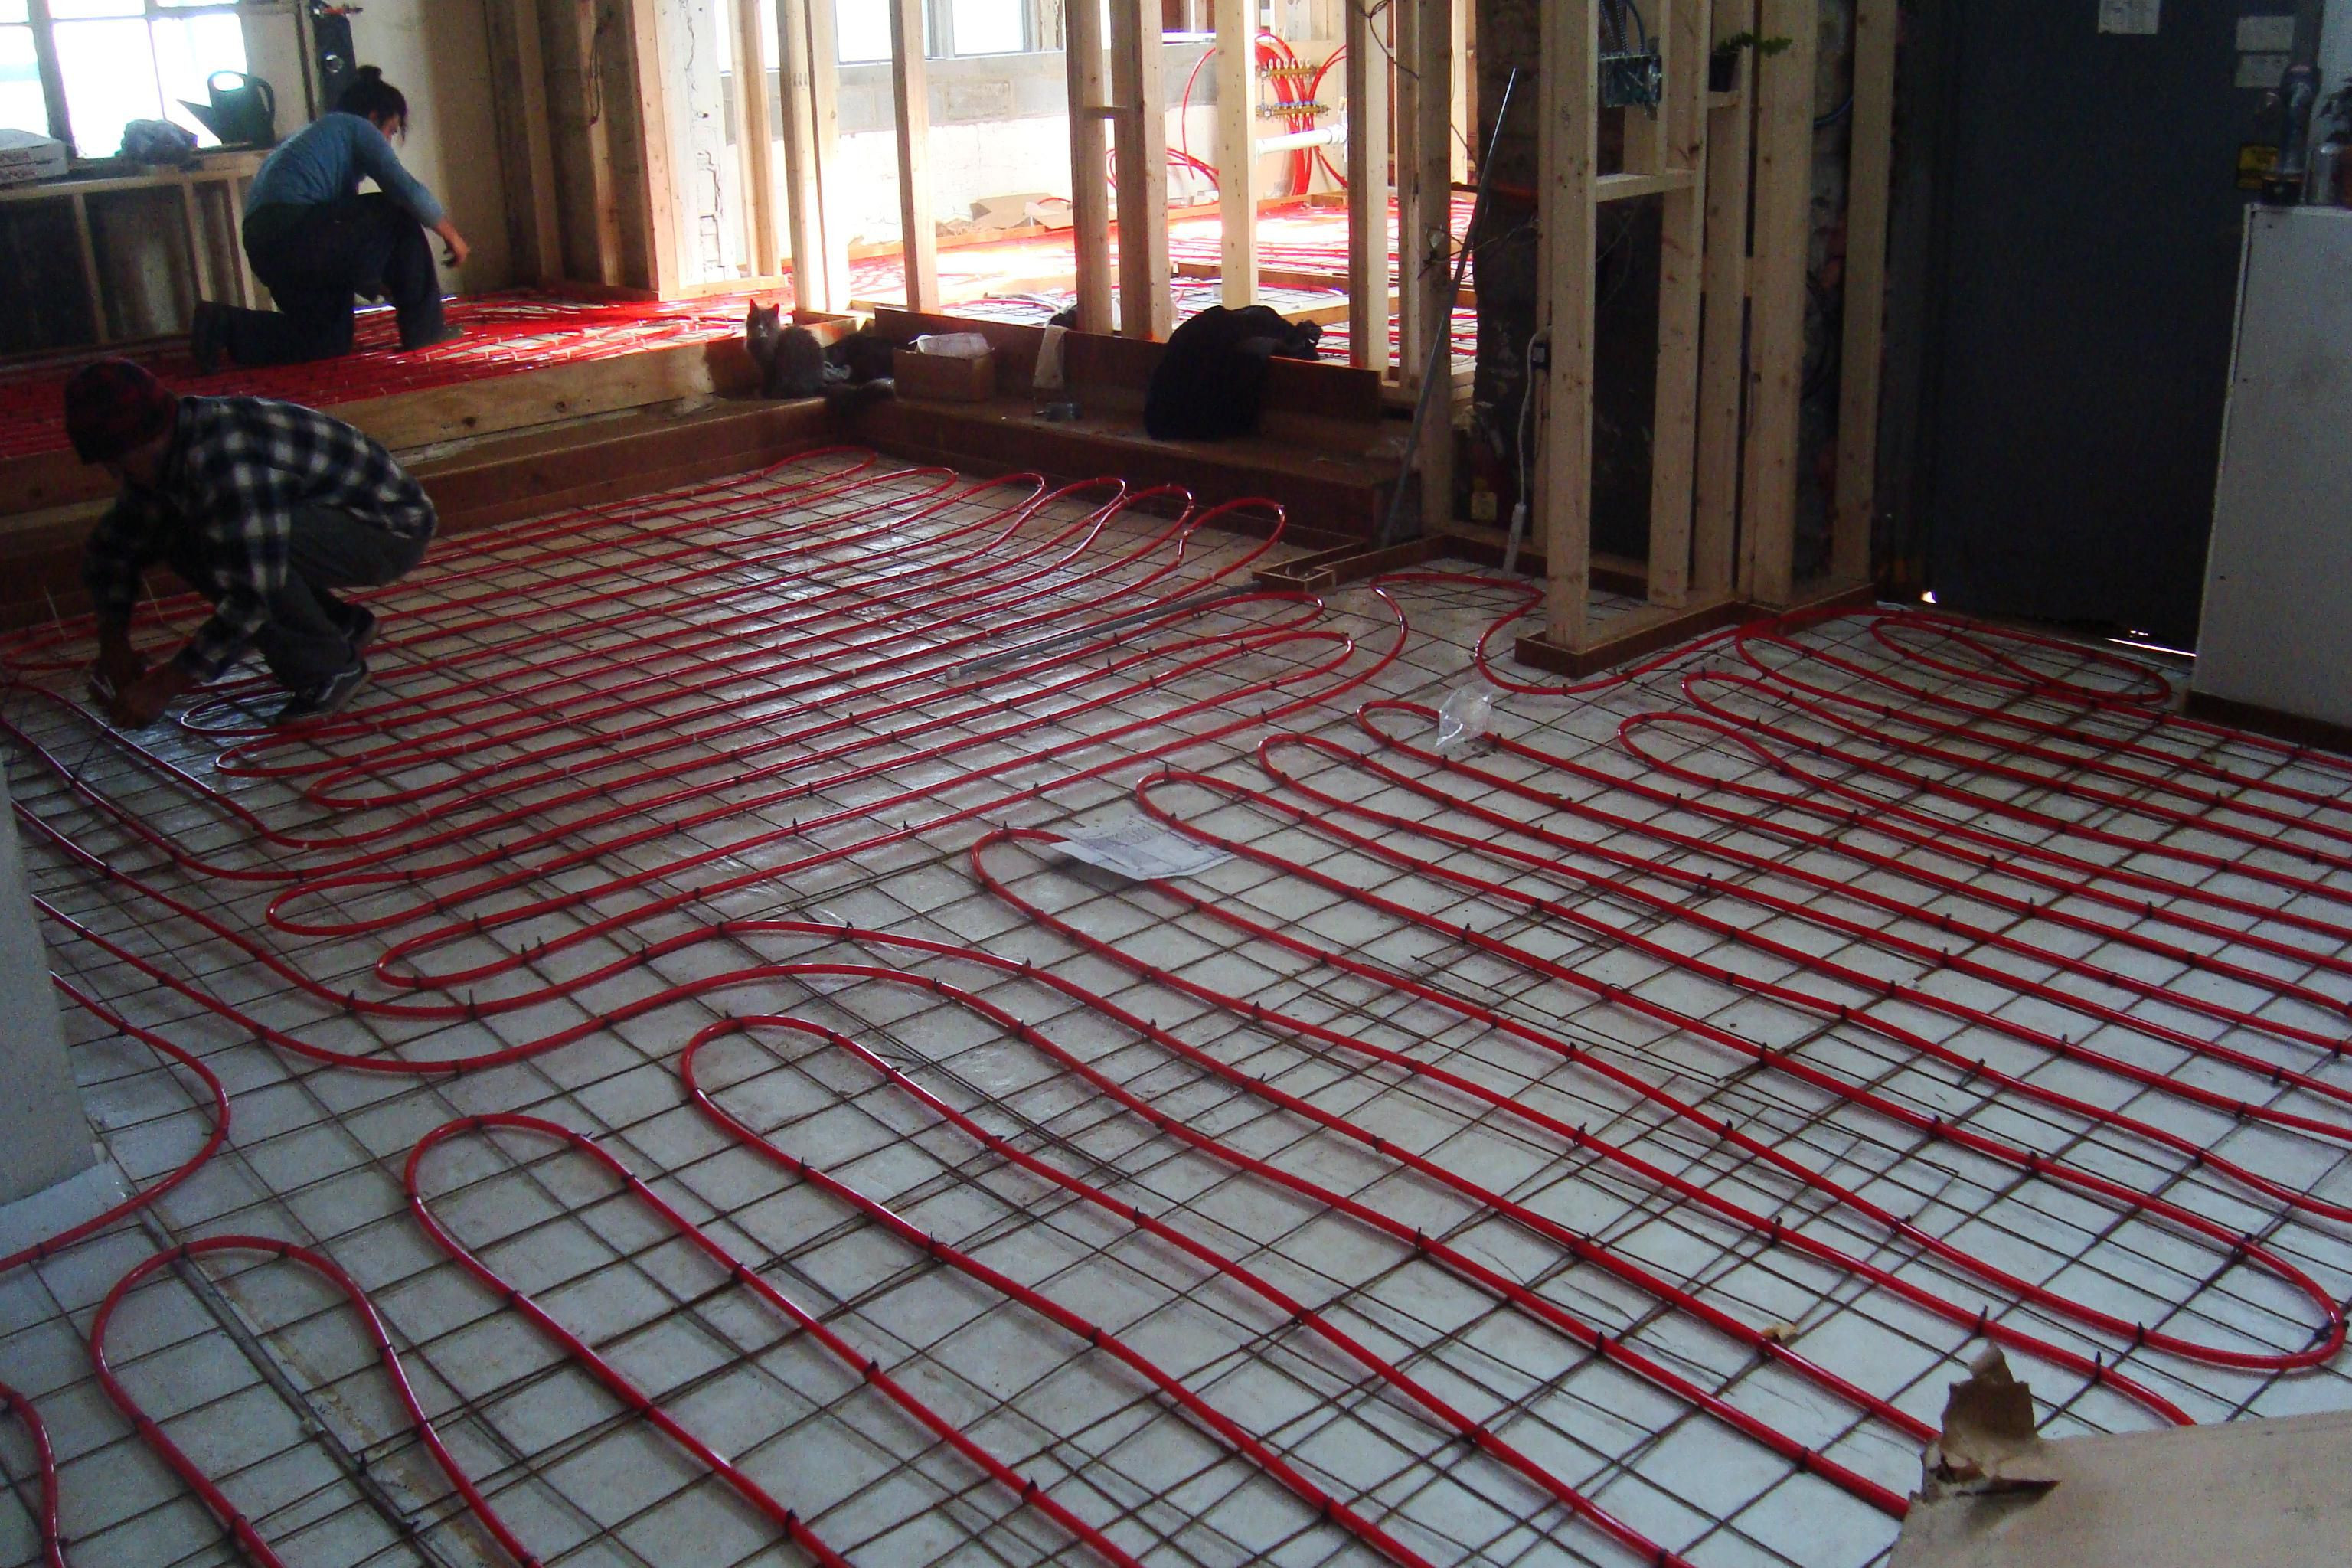 hardwood flooring prices south africa of electric radiant floor heating the basics within 5216244513 abe93aacd8 o 56a49ef05f9b58b7d0d7e052